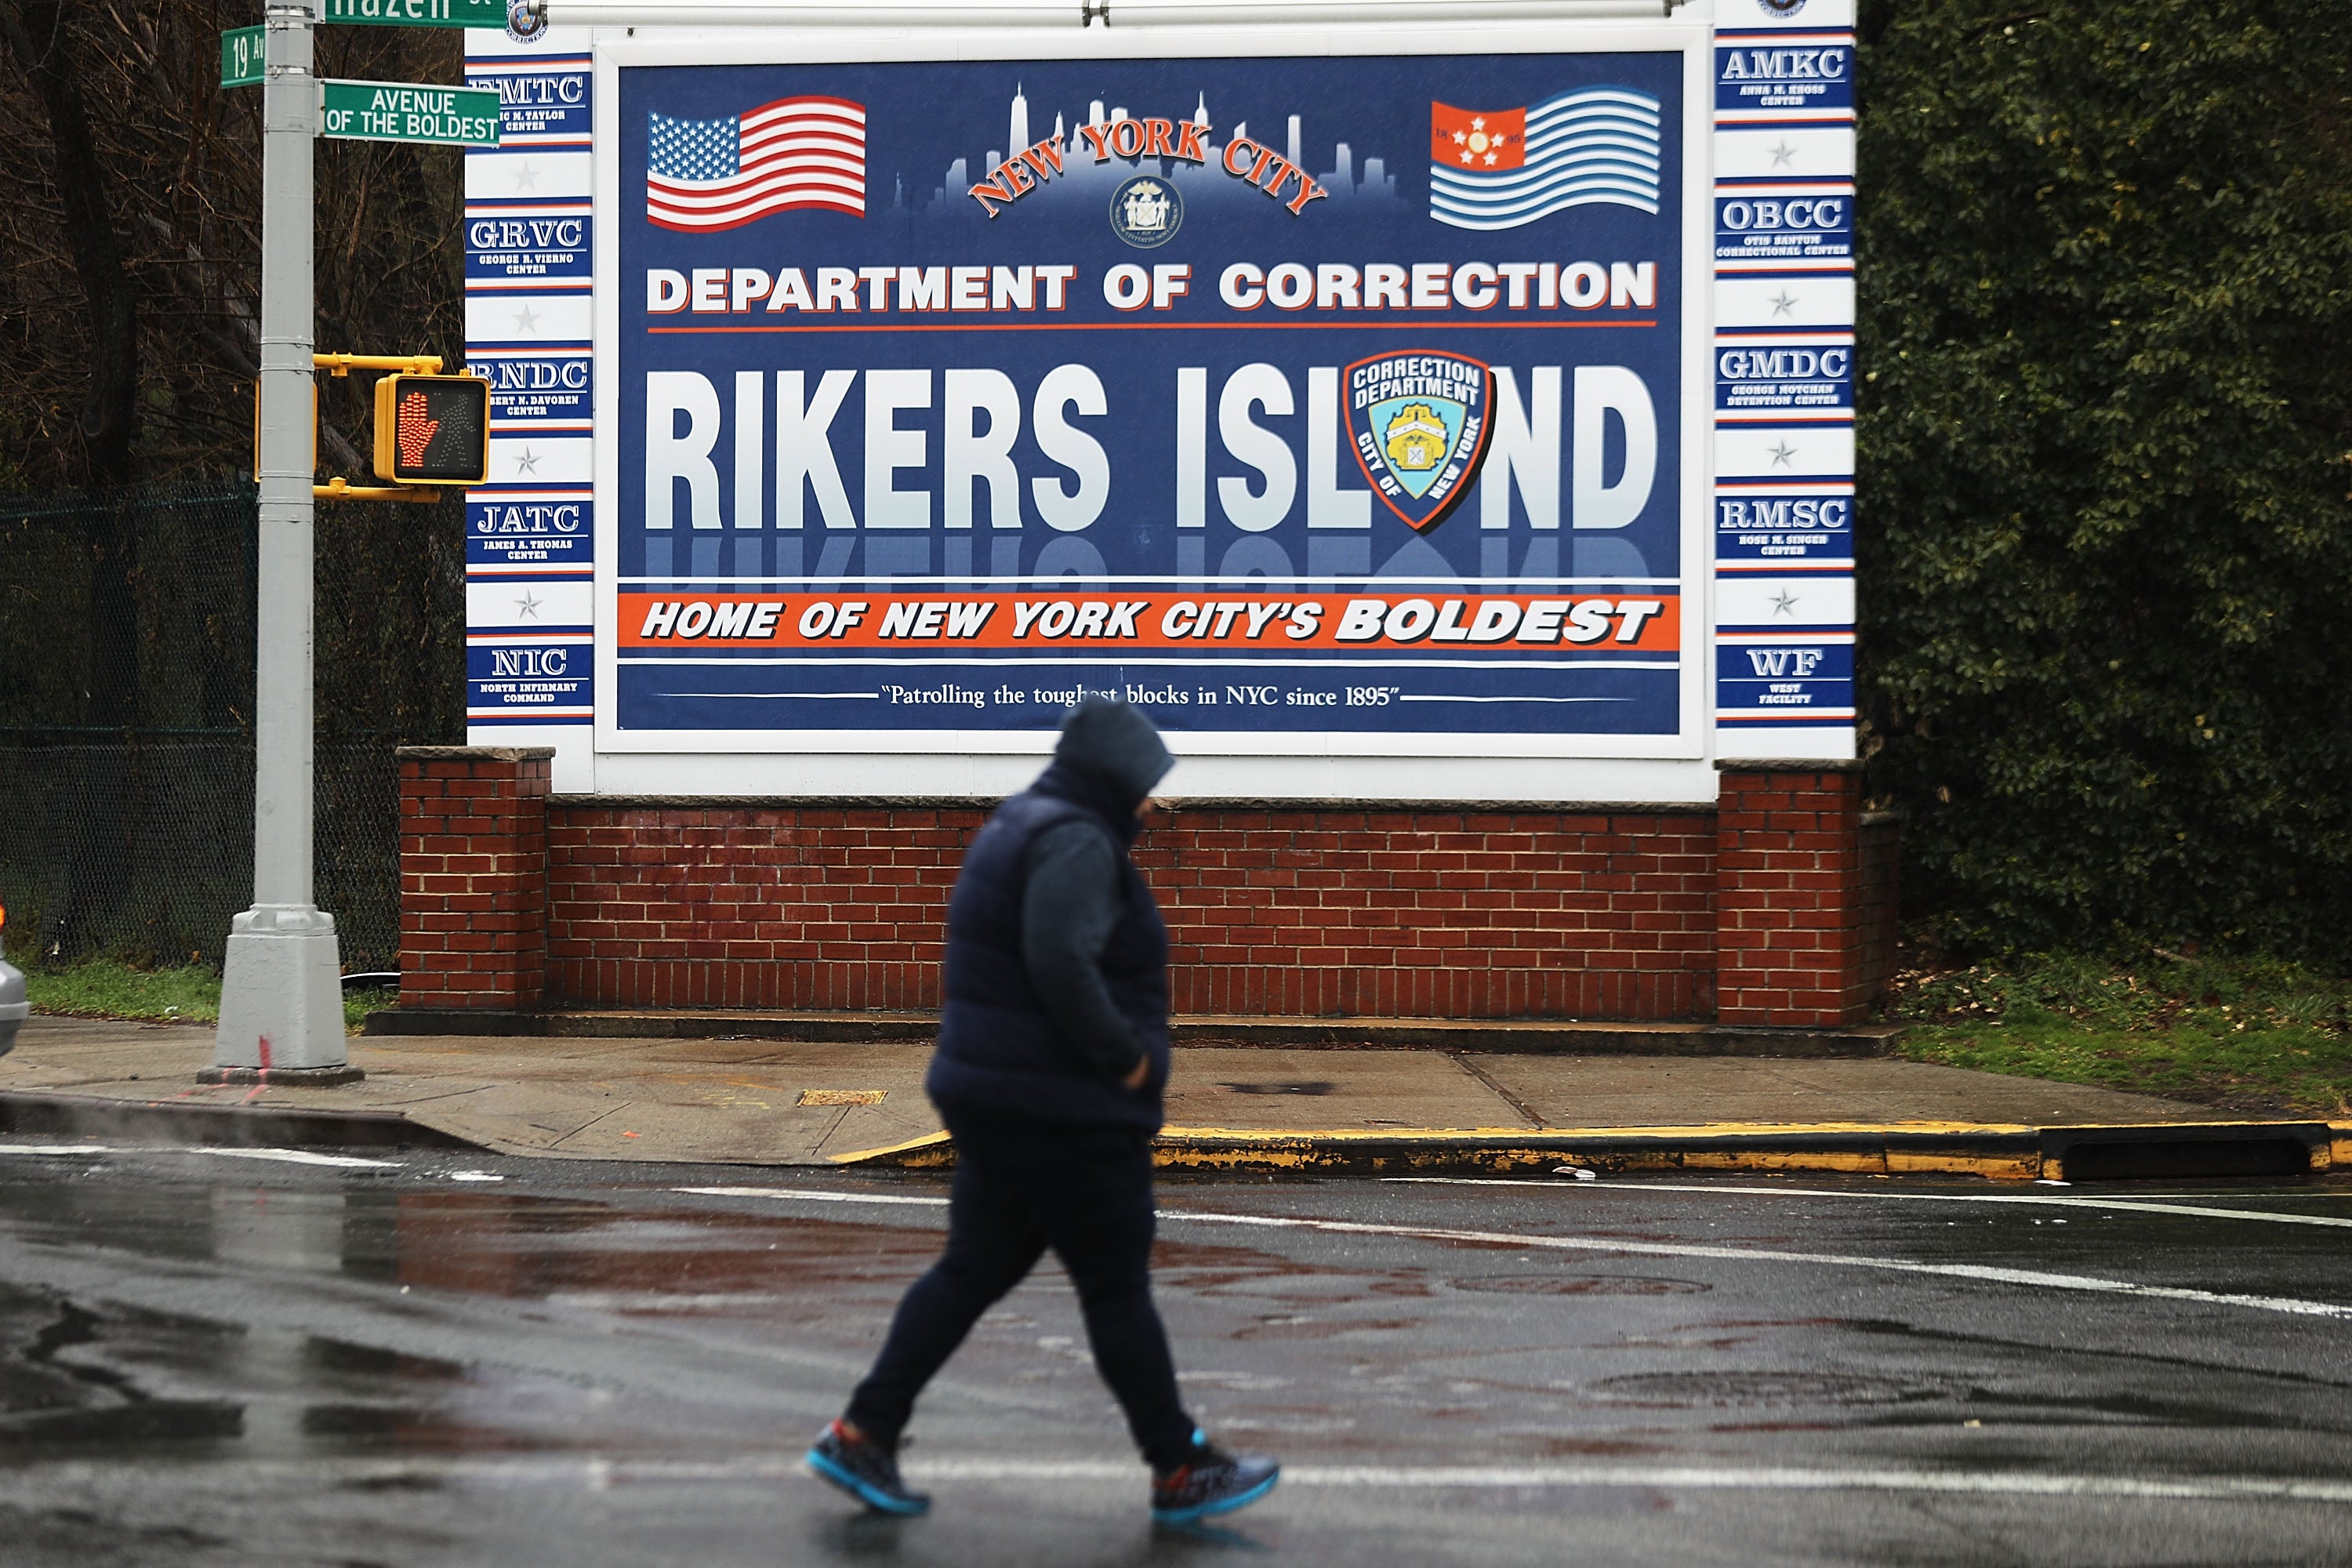 NYC Mayor Bill de Blasio Wants To Close Rikers Island. But It'll Take Some Time
